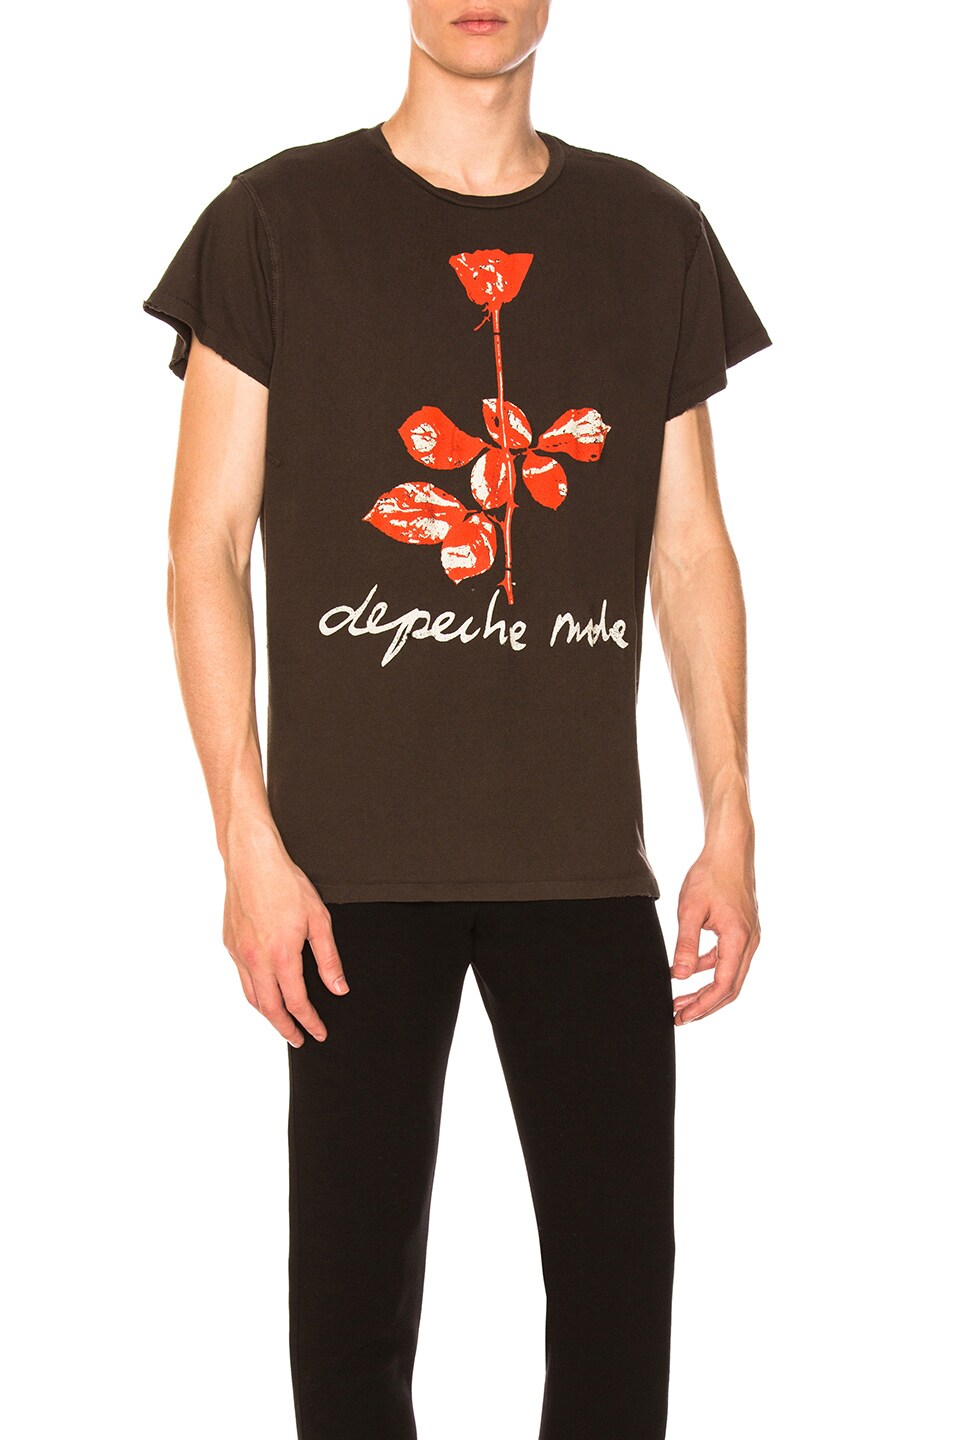 Image 1 of Madeworn for FWRD Depeche Mode Tee in Dirty Black